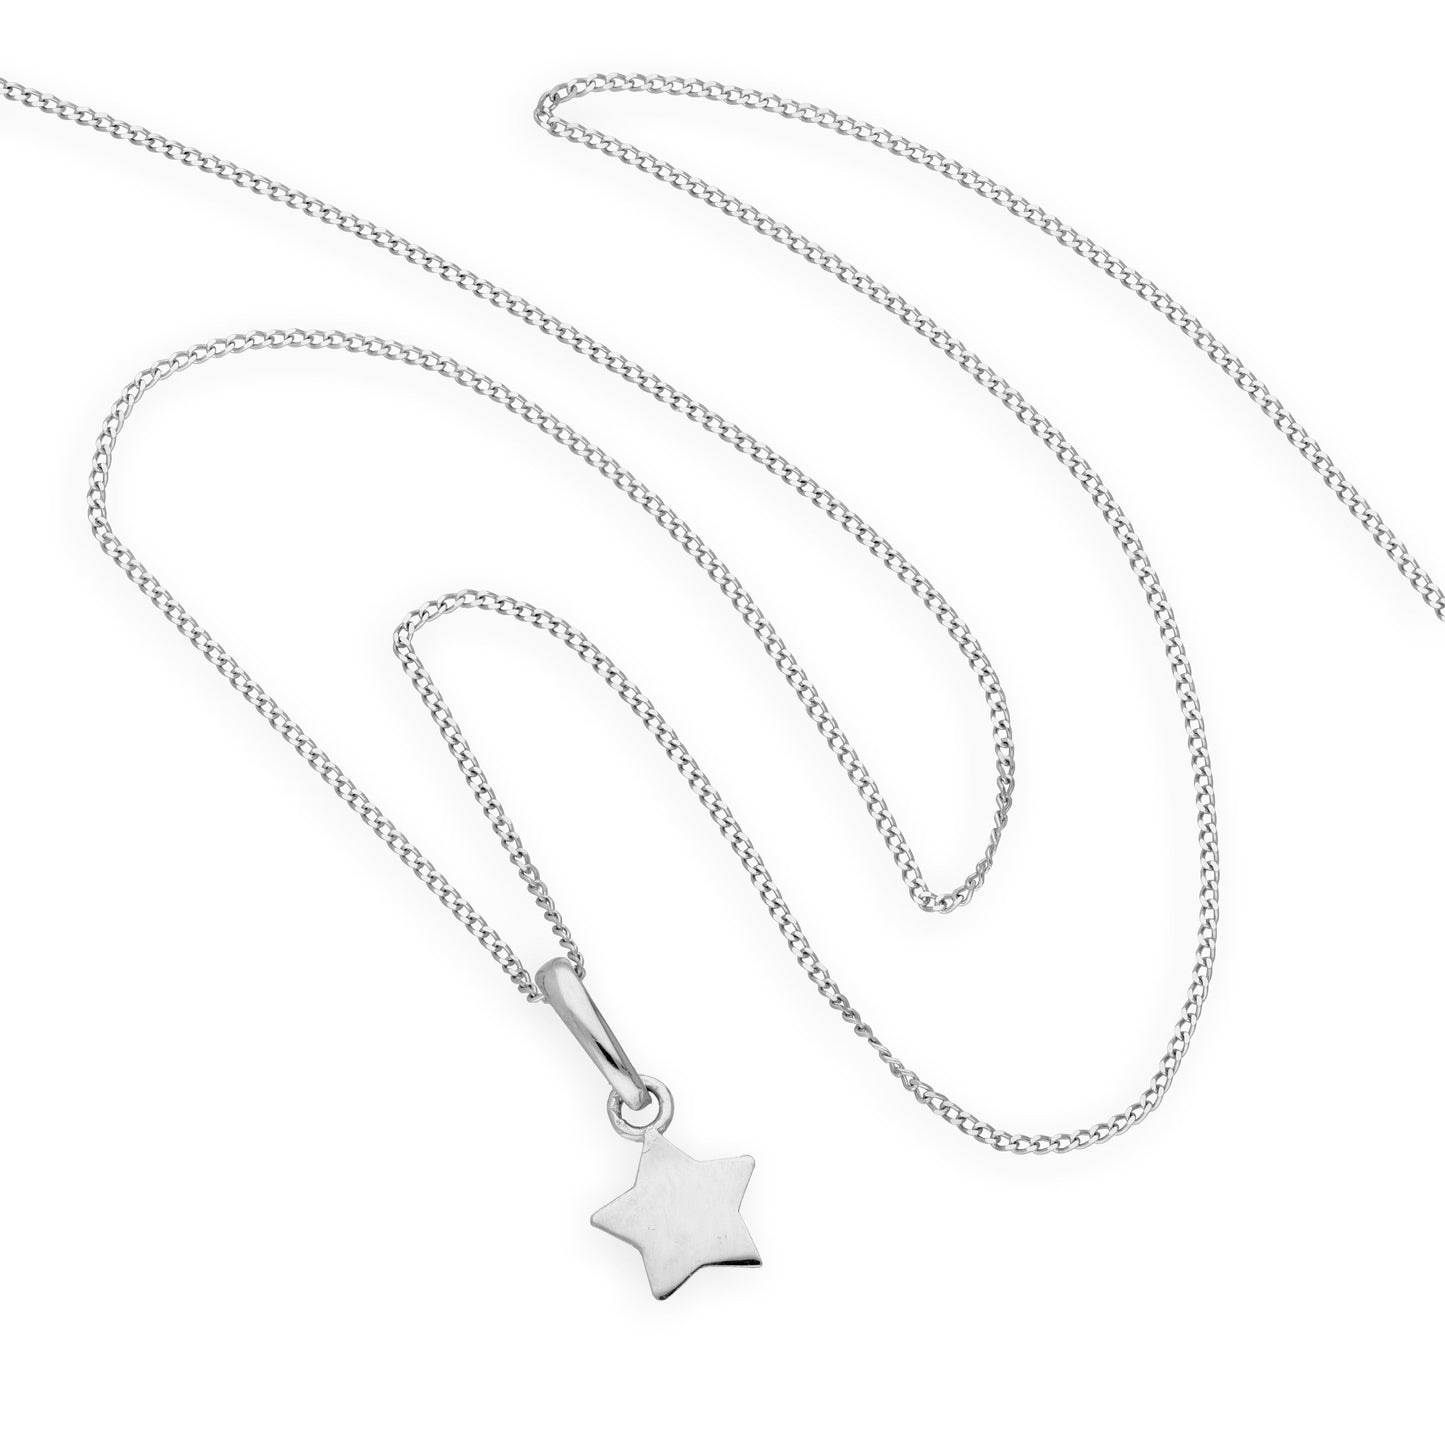 9ct White Gold Star Pendant Necklace 16 - 20 Inches